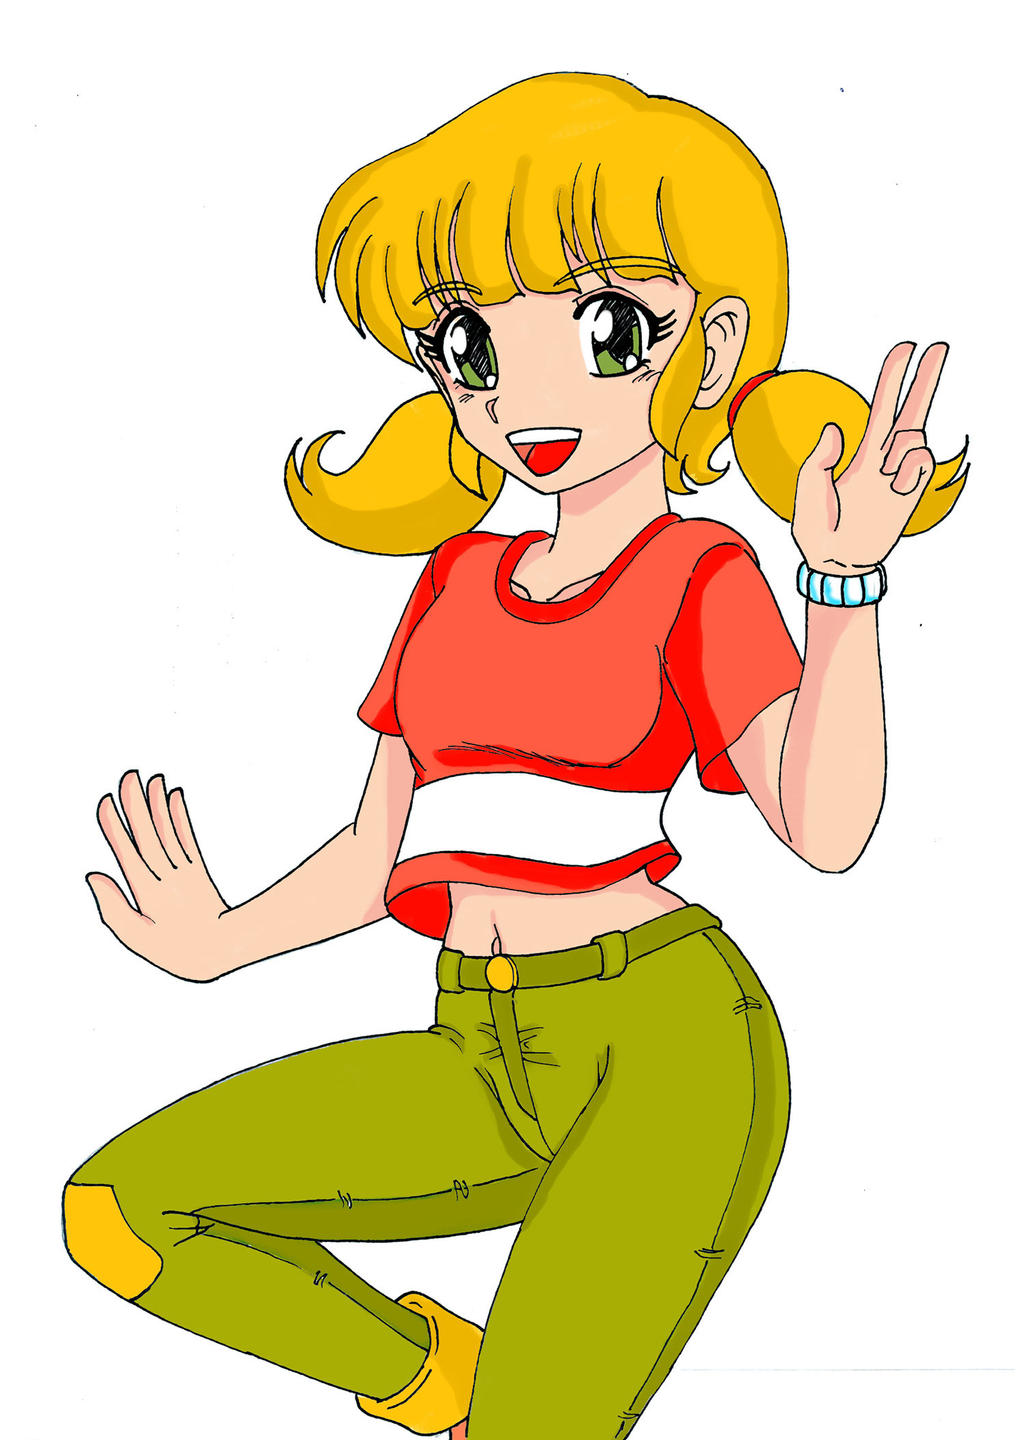 Penny Gadget Anime Style by ArthurWolf on DeviantArt